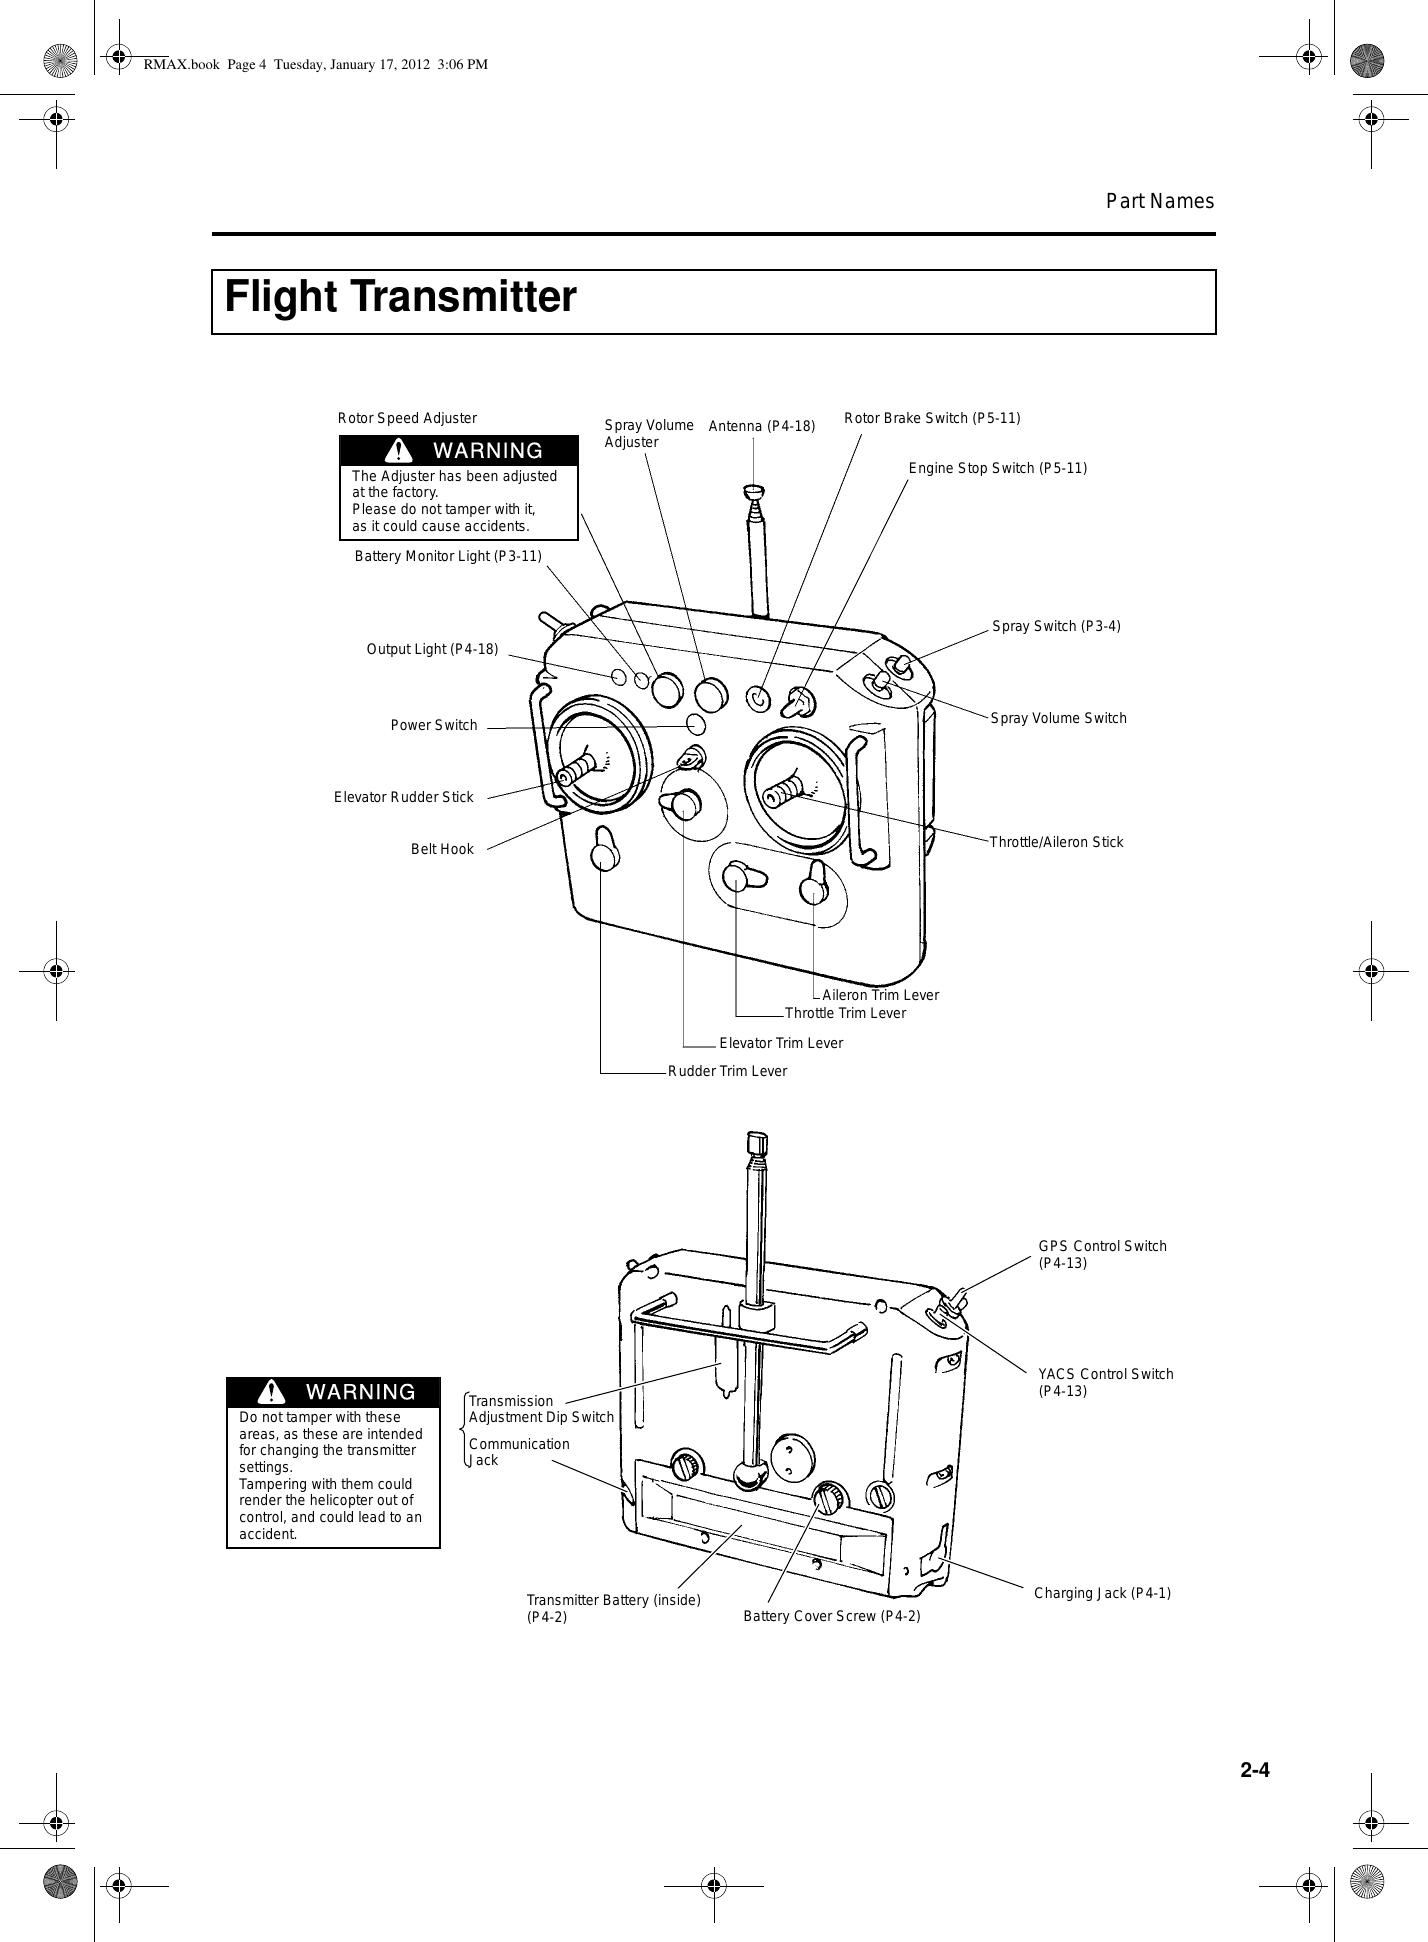 Part Names2-4Flight TransmitterOutput Light (P4-18)Battery Monitor Light (P3-11)Spray Volume Adjuster Antenna (P4-18) Rotor Brake Switch (P5-11)Engine Stop Switch (P5-11)Spray Switch (P3-4)Throttle/Aileron StickAileron Trim LeverThrottle Trim LeverElevator Trim LeverRudder Trim LeverPower SwitchElevator Rudder StickBelt HookTransmission Adjustment Dip SwitchGPS Control Switch (P4-13)YACS Control Switch (P4-13)Charging Jack (P4-1)Battery Cover Screw (P4-2)Transmitter Battery (inside) (P4-2)Communication JackSpray Volume SwitchDo not tamper with these areas, as these are intended for changing the transmitter settings.Tampering with them could render the helicopter out of control, and could lead to an accident.WARNINGRotor Speed AdjusterThe Adjuster has been adjusted at the factory.Please do not tamper with it, as it could cause accidents.WARNINGRMAX.book  Page 4  Tuesday, January 17, 2012  3:06 PM